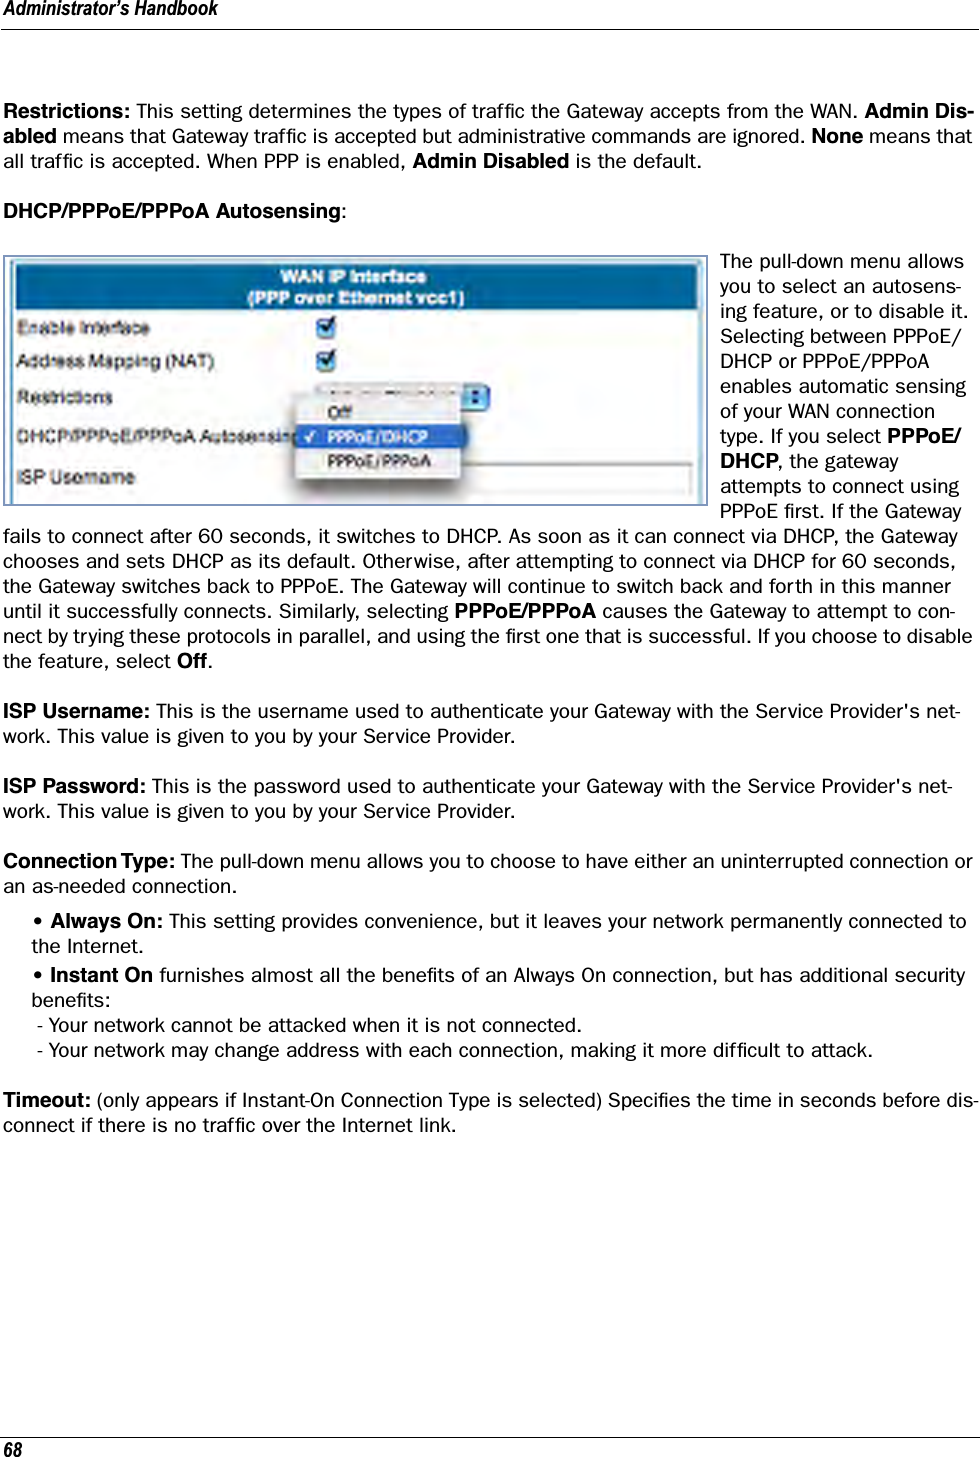 Administrator’s Handbook68Restrictions: This setting determines the types of trafﬁc the Gateway accepts from the WAN. Admin Dis-abled means that Gateway trafﬁc is accepted but administrative commands are ignored. None means that all trafﬁc is accepted. When PPP is enabled, Admin Disabled is the default.DHCP/PPPoE/PPPoA Autosensing: The pull-down menu allows you to select an autosens-ing feature, or to disable it. Selecting between PPPoE/DHCP or PPPoE/PPPoA enables automatic sensing of your WAN connection type. If you select PPPoE/DHCP, the gateway attempts to connect using PPPoE ﬁrst. If the Gateway fails to connect after 60 seconds, it switches to DHCP. As soon as it can connect via DHCP, the Gateway chooses and sets DHCP as its default. Otherwise, after attempting to connect via DHCP for 60 seconds, the Gateway switches back to PPPoE. The Gateway will continue to switch back and forth in this manner until it successfully connects. Similarly, selecting PPPoE/PPPoA causes the Gateway to attempt to con-nect by trying these protocols in parallel, and using the ﬁrst one that is successful. If you choose to disable the feature, select Off.ISP Username: This is the username used to authenticate your Gateway with the Service Provider&apos;s net-work. This value is given to you by your Service Provider.ISP Password: This is the password used to authenticate your Gateway with the Service Provider&apos;s net-work. This value is given to you by your Service Provider.Connection Type: The pull-down menu allows you to choose to have either an uninterrupted connection or an as-needed connection.• Always On: This setting provides convenience, but it leaves your network permanently connected to the Internet.• Instant On furnishes almost all the beneﬁts of an Always On connection, but has additional security beneﬁts: - Your network cannot be attacked when it is not connected. - Your network may change address with each connection, making it more difﬁcult to attack.Timeout: (only appears if Instant-On Connection Type is selected) Speciﬁes the time in seconds before dis-connect if there is no trafﬁc over the Internet link.